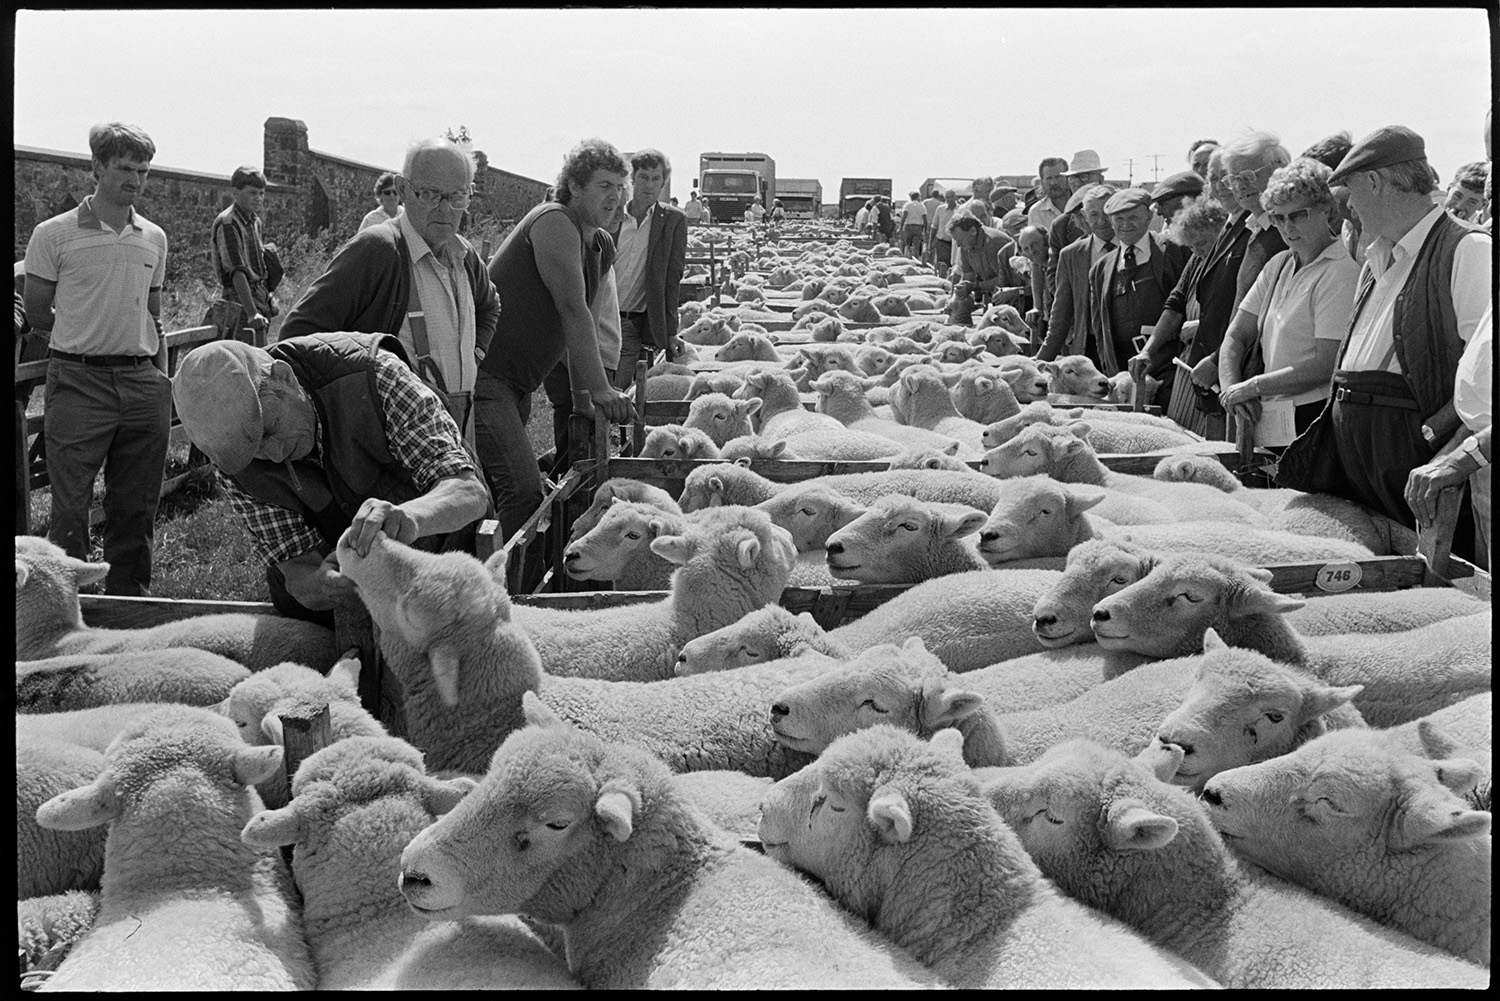 Sheep fair, farmers, auctioneers moving along pens of sheep on hot day. Overview towards town. 
[Men and women looking at sheep in pens at South Molton Sheep Fair. One man is inspecting the teeth of a sheep.]